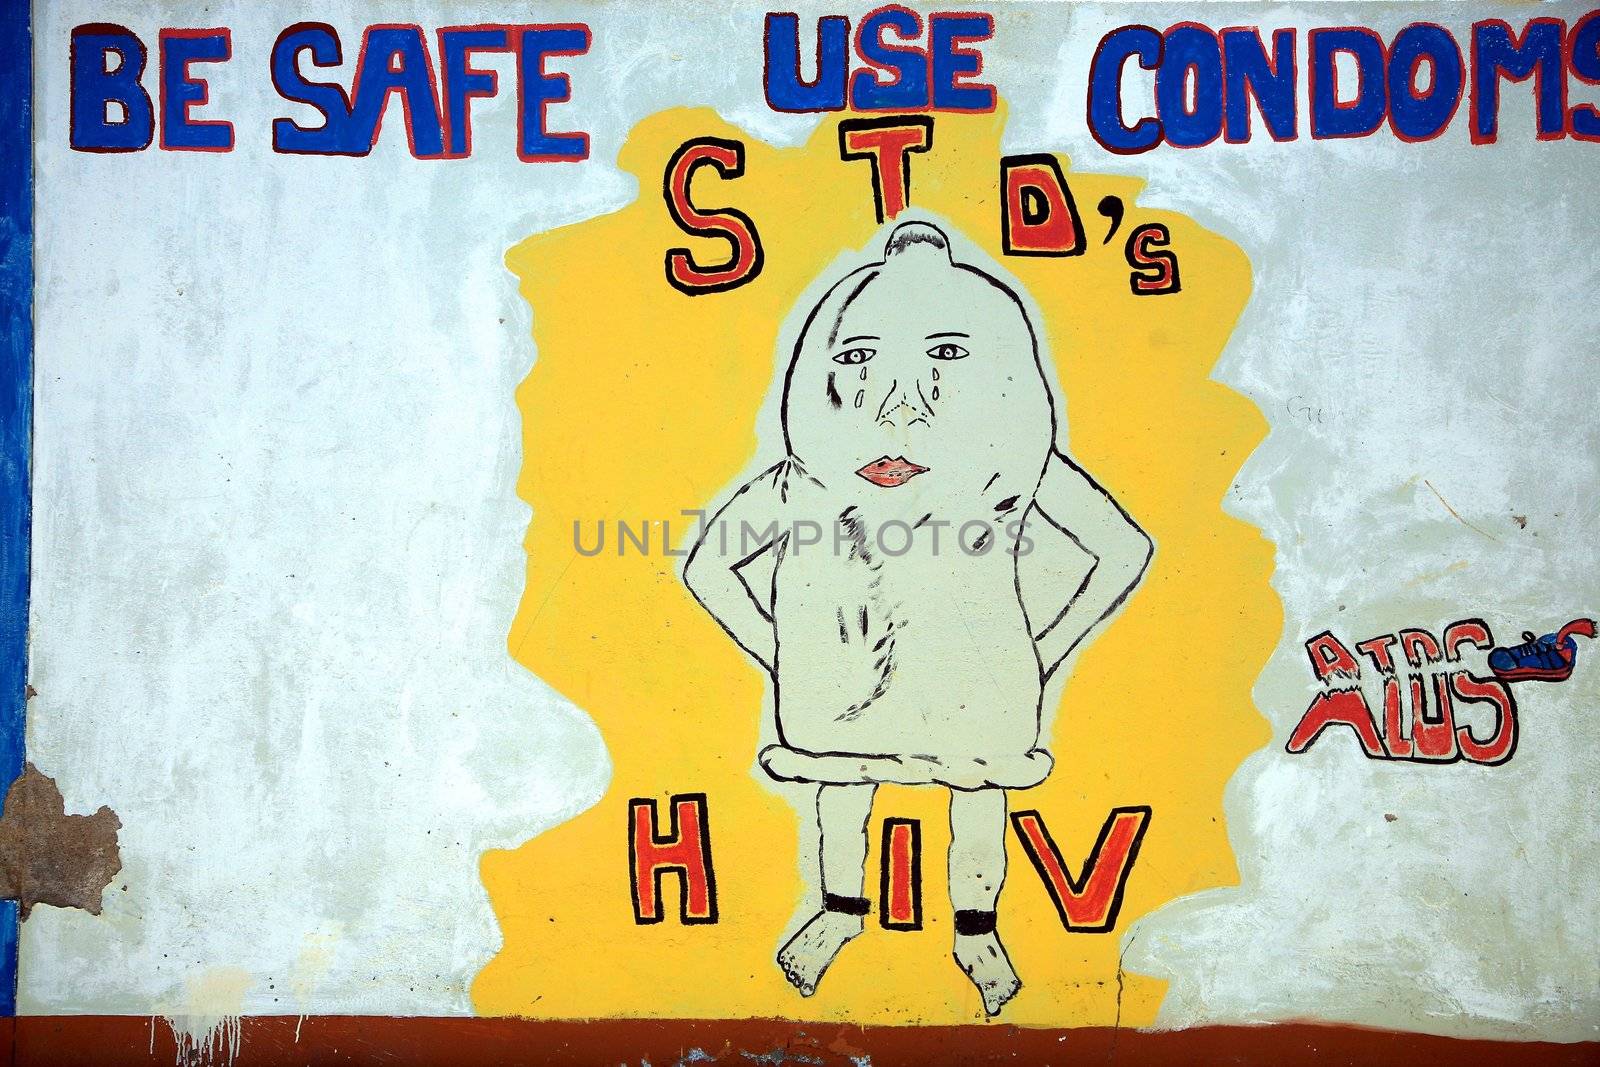 AIDS actions promoting the use of condoms